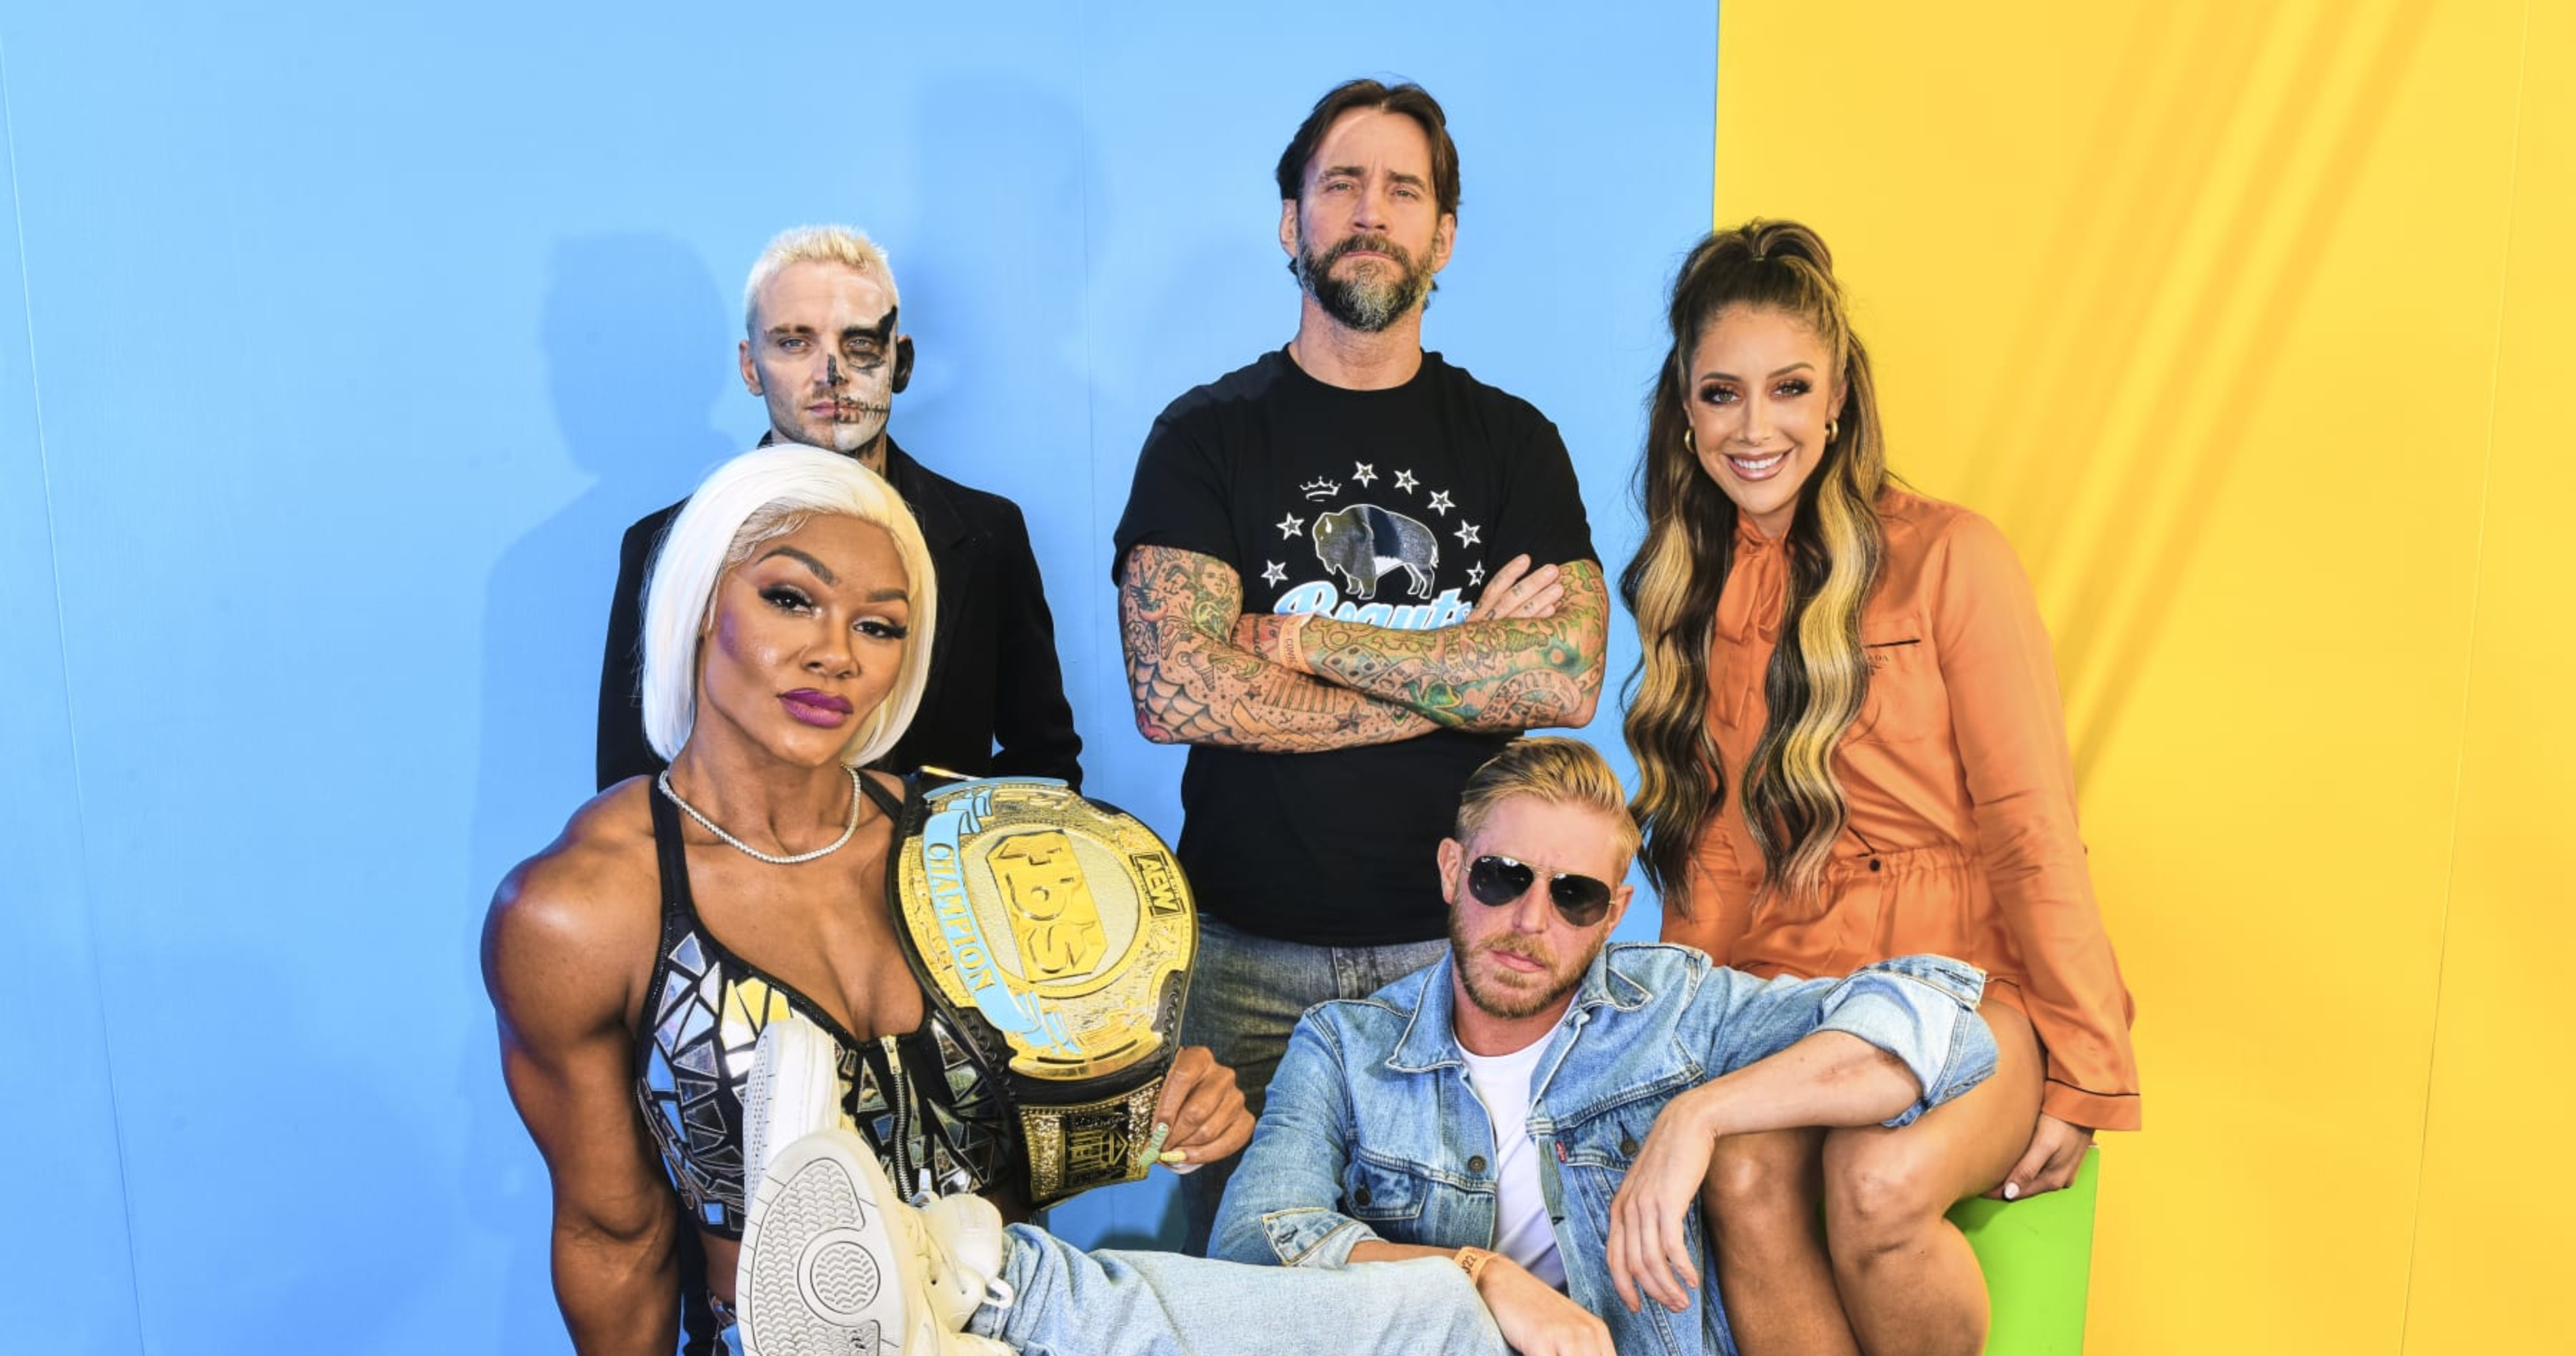 Backstage Wwe And Aew Rumors Latest On Cm Punk Trish Stratus Vs Becky Lynch More News 